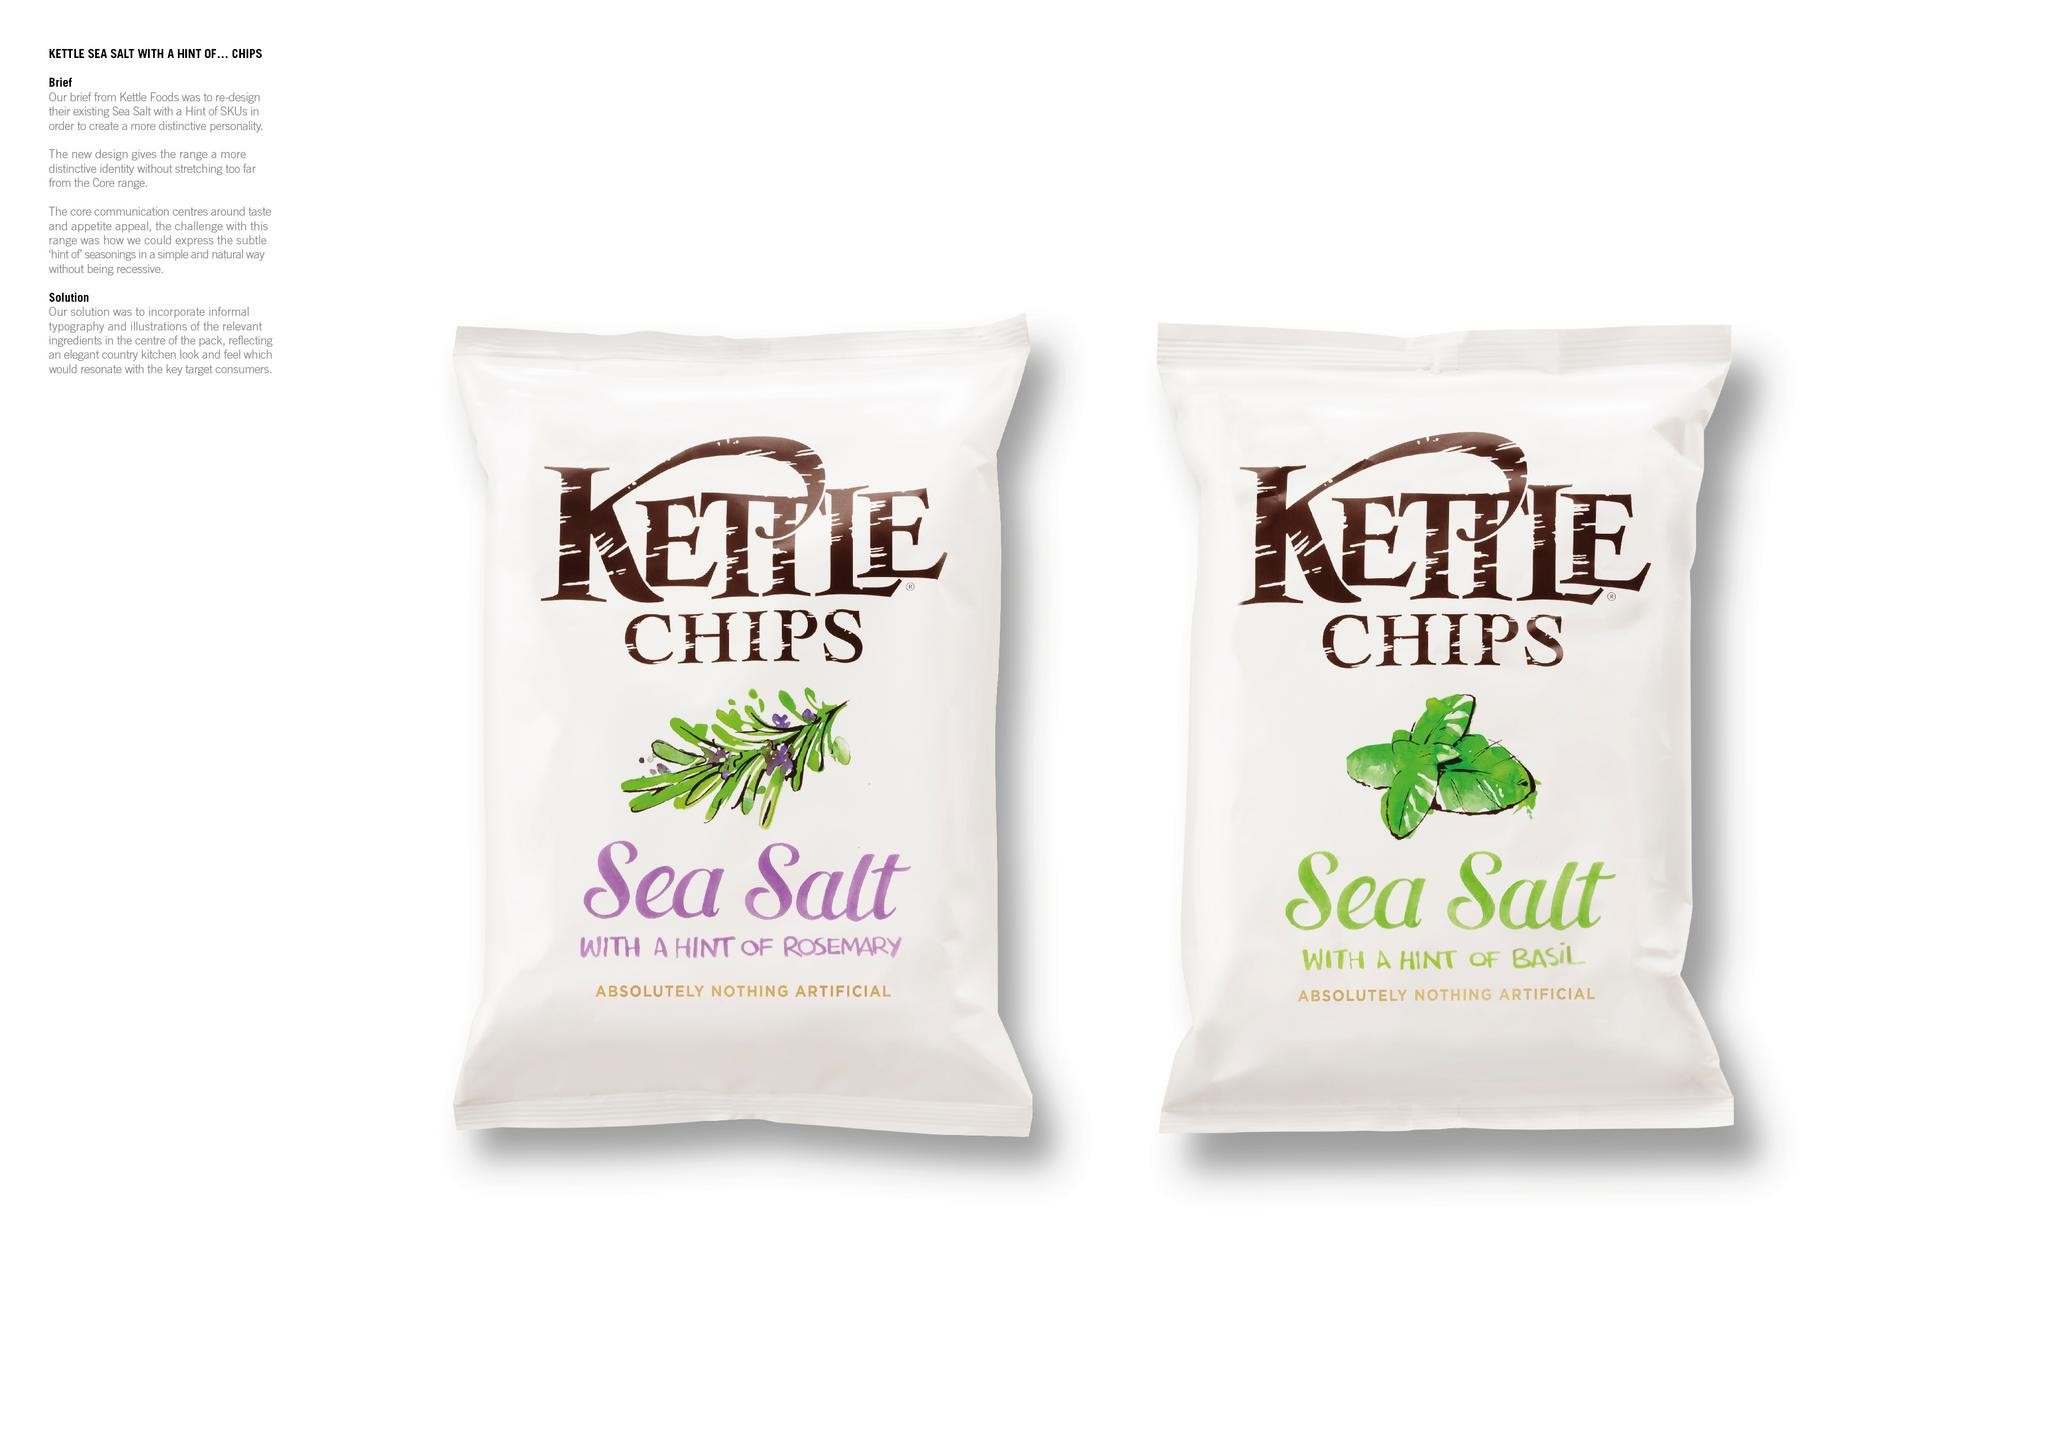 KETTLE® SEA SALT WITH A HINT OF… CHIPS